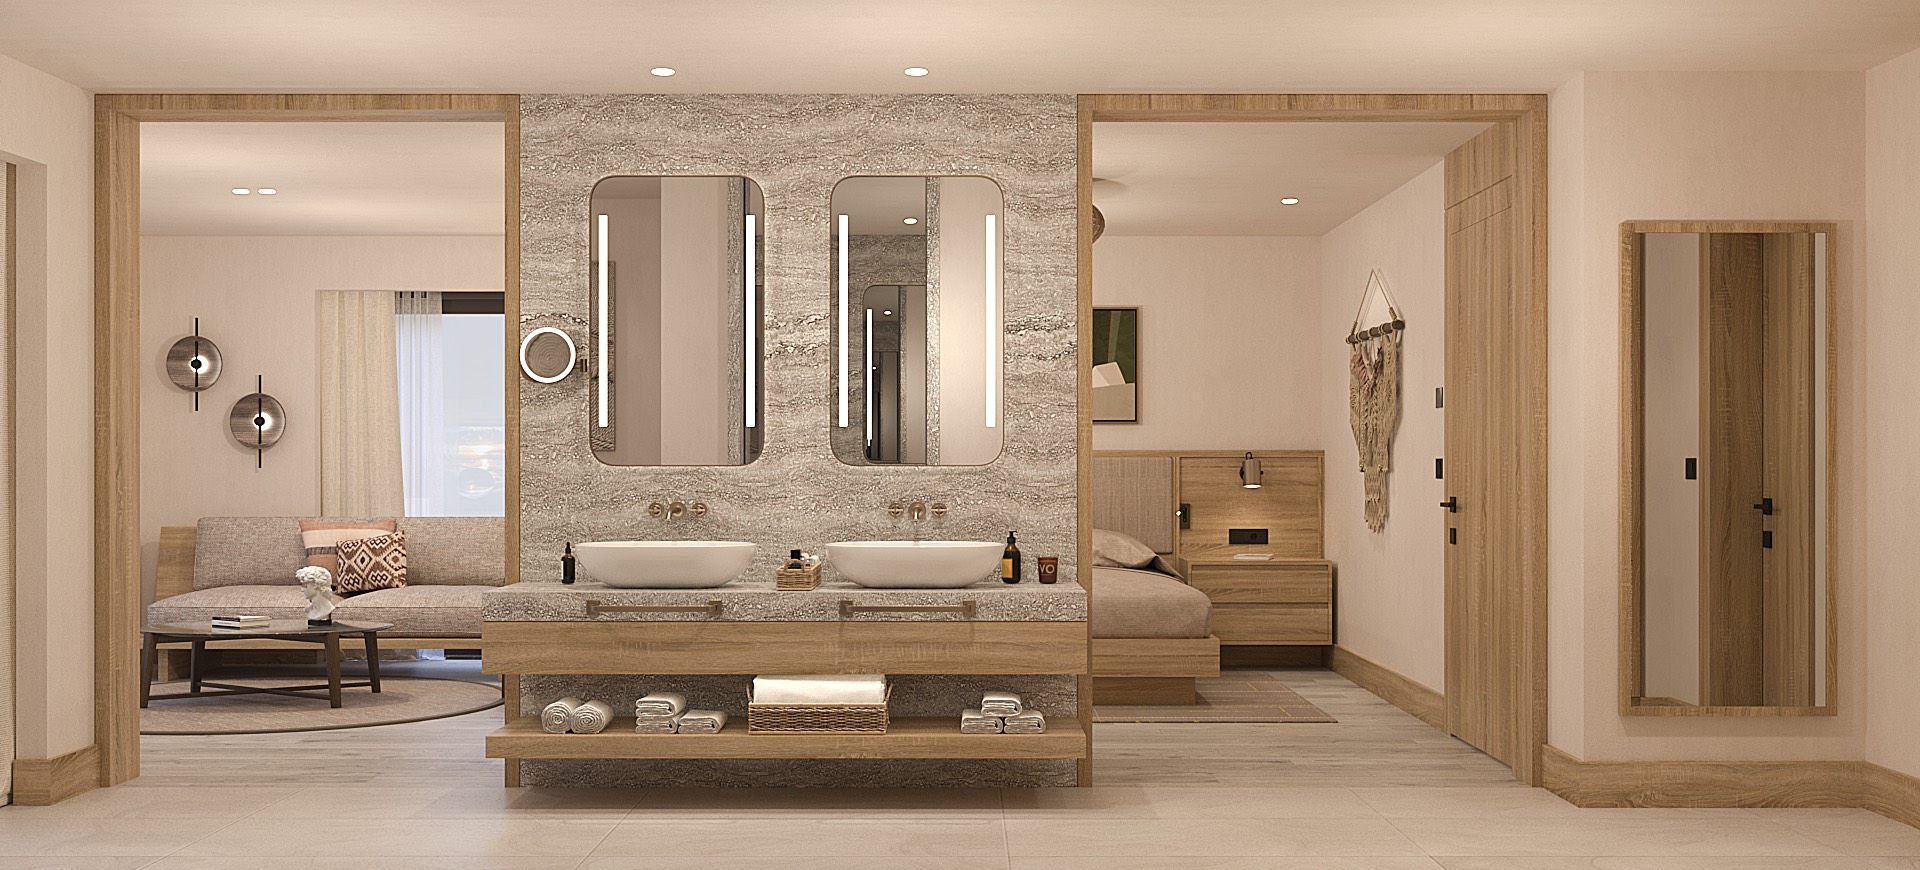 Large cream bathroom with double sink, two rectangular mirrors, and two open doors showing a sofa and part of a bed